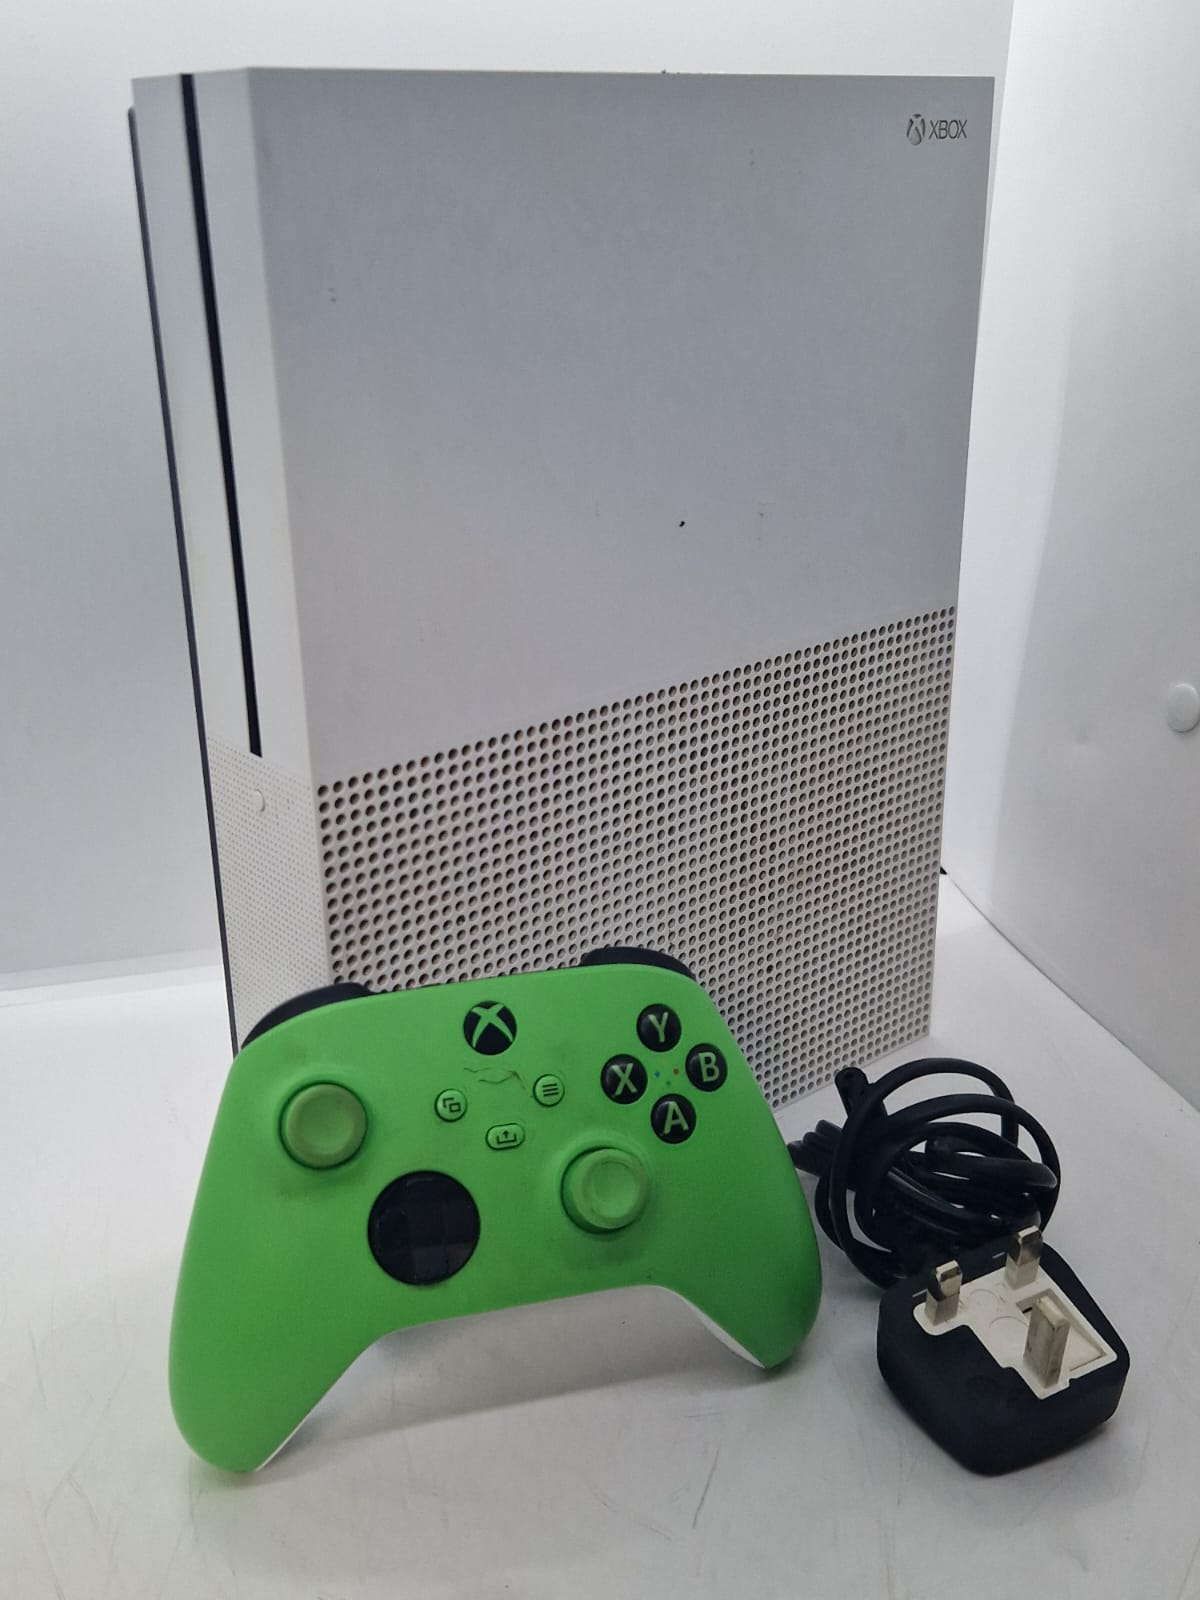 Microsoft Xbox One S 500GB Console with Green Controller